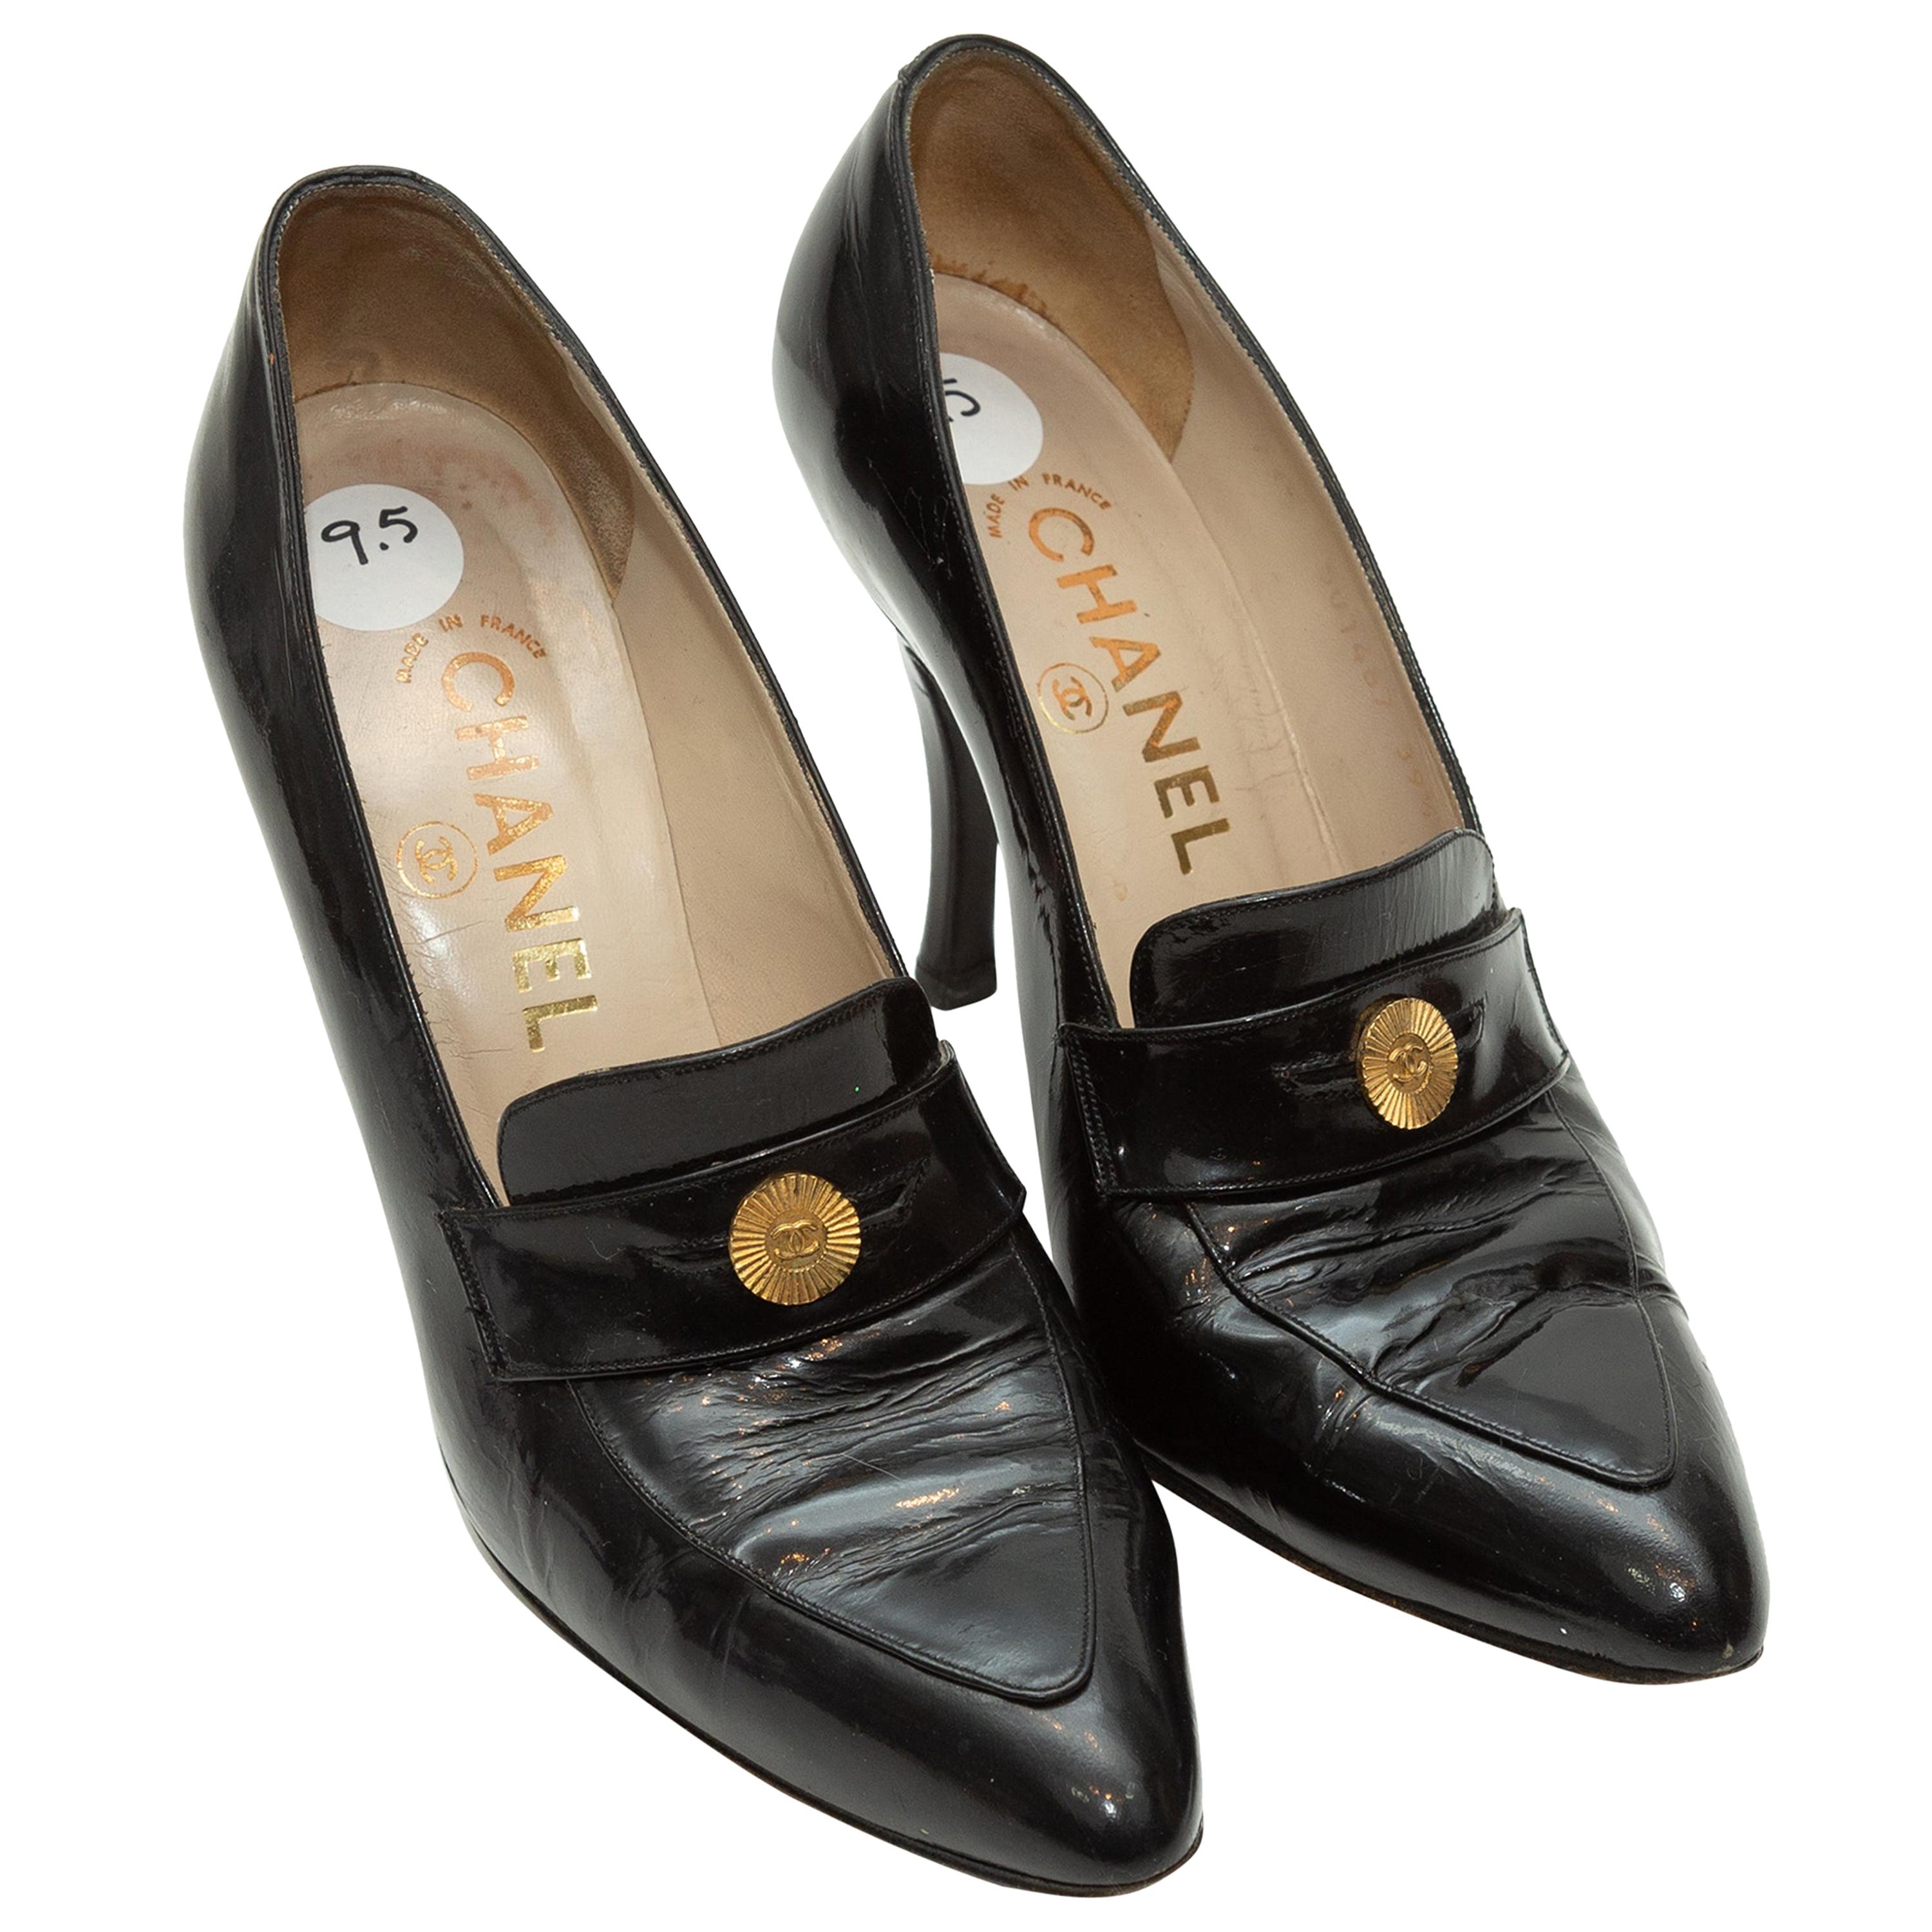 Chanel Black Pointed-Toe Heeled Penny Loafers